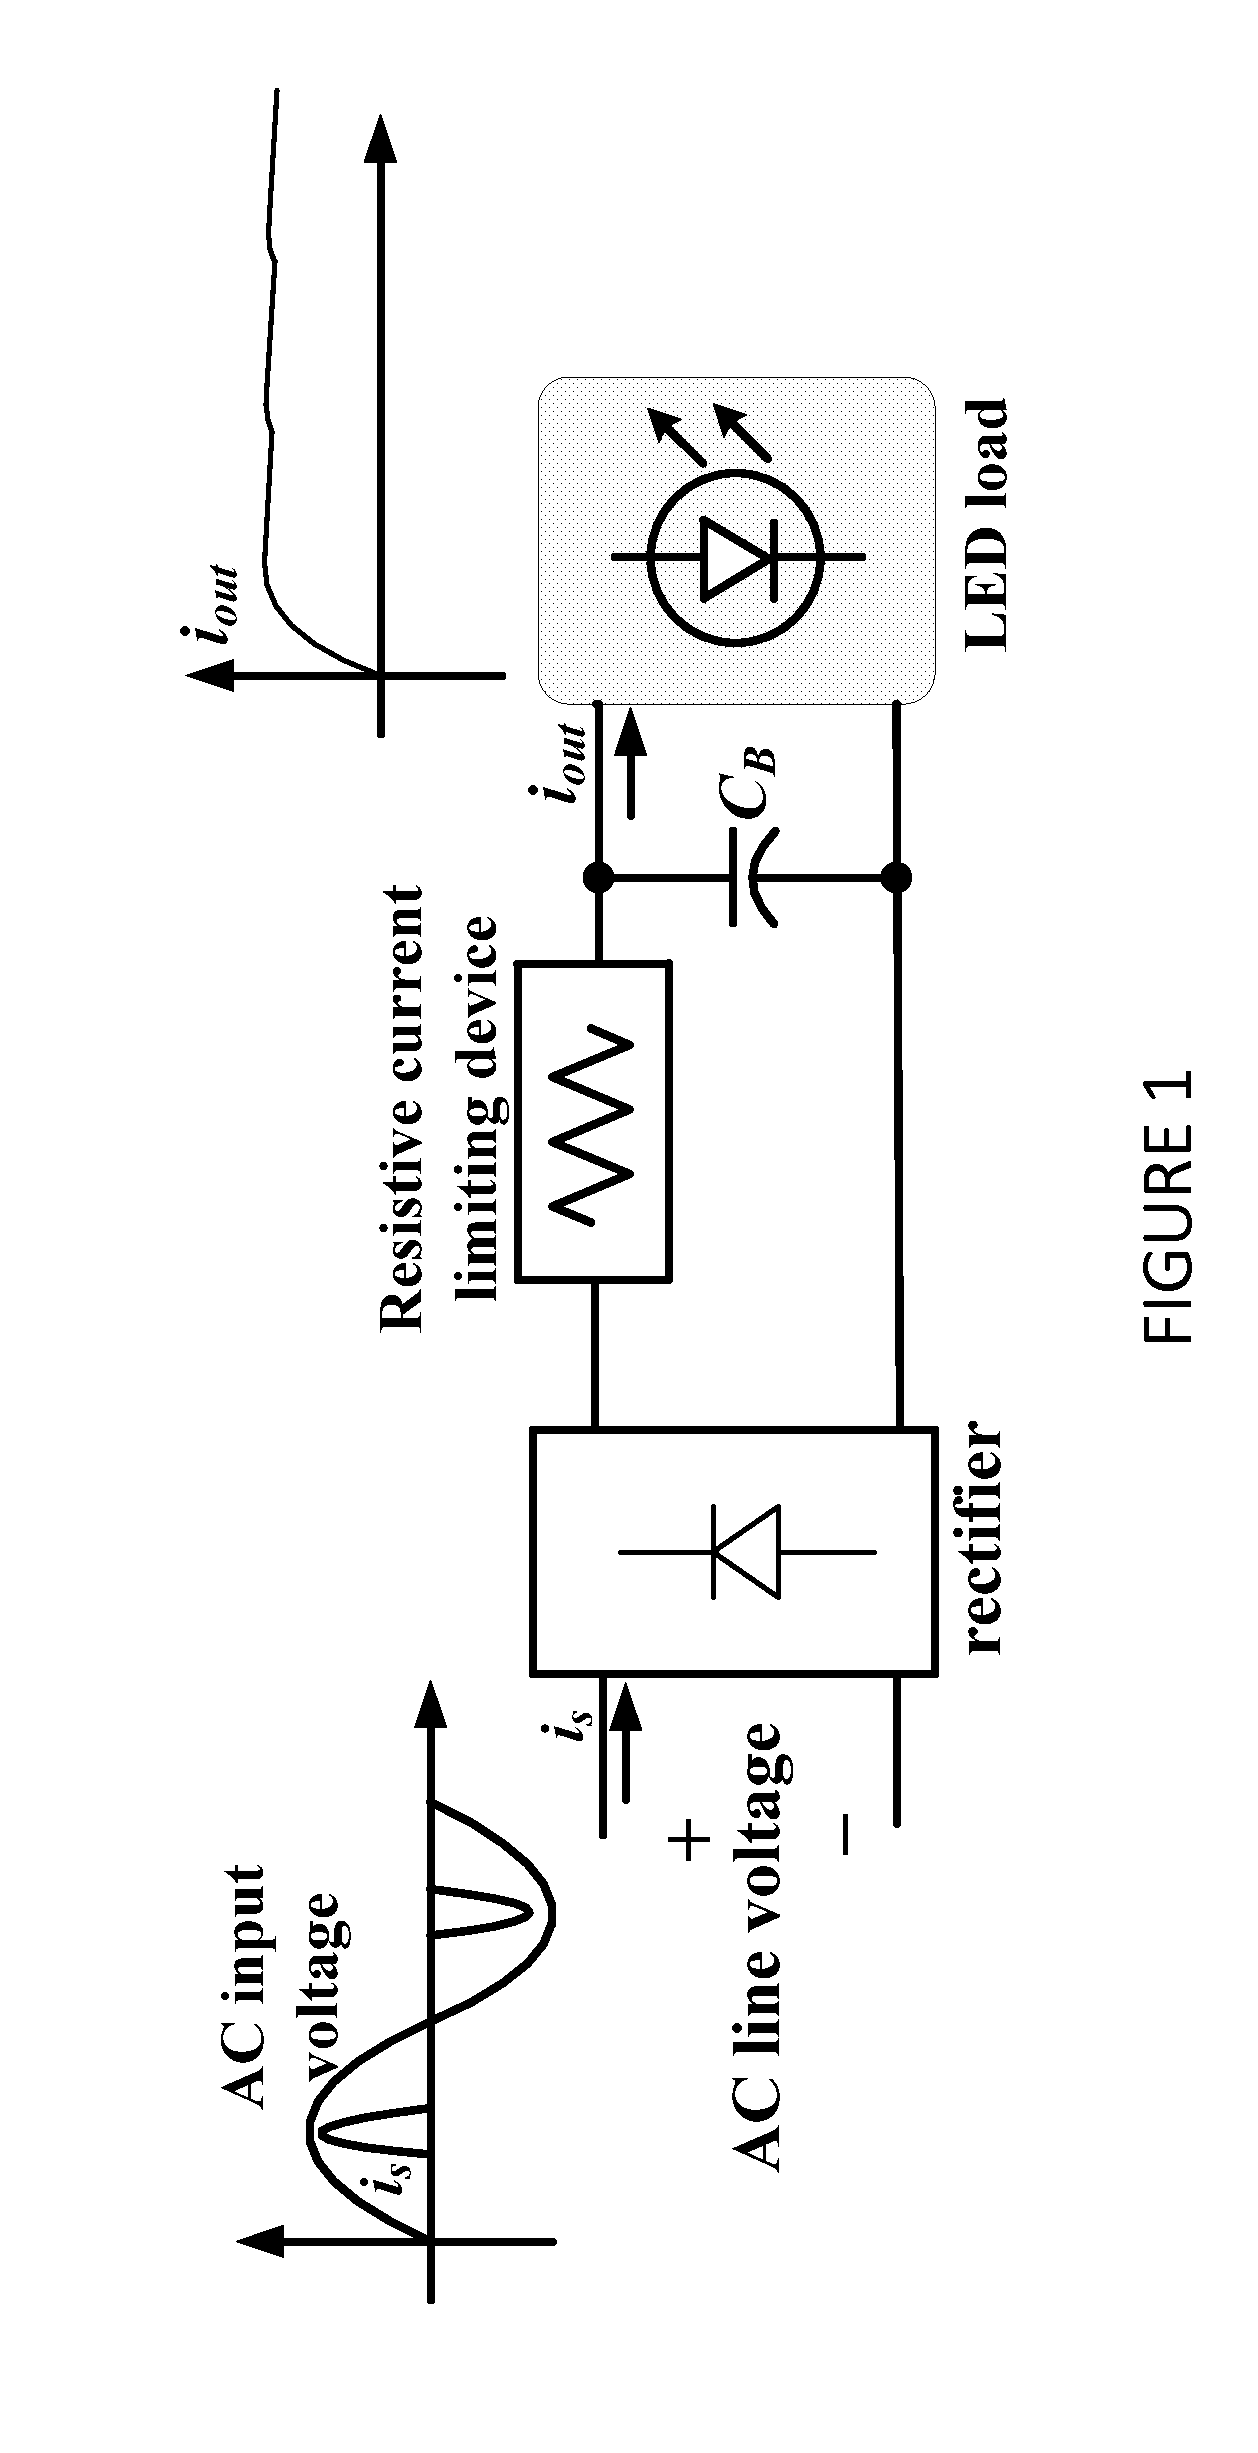 High power factor, electrolytic capacitor-less driver circuit for light-emitting diode lamps